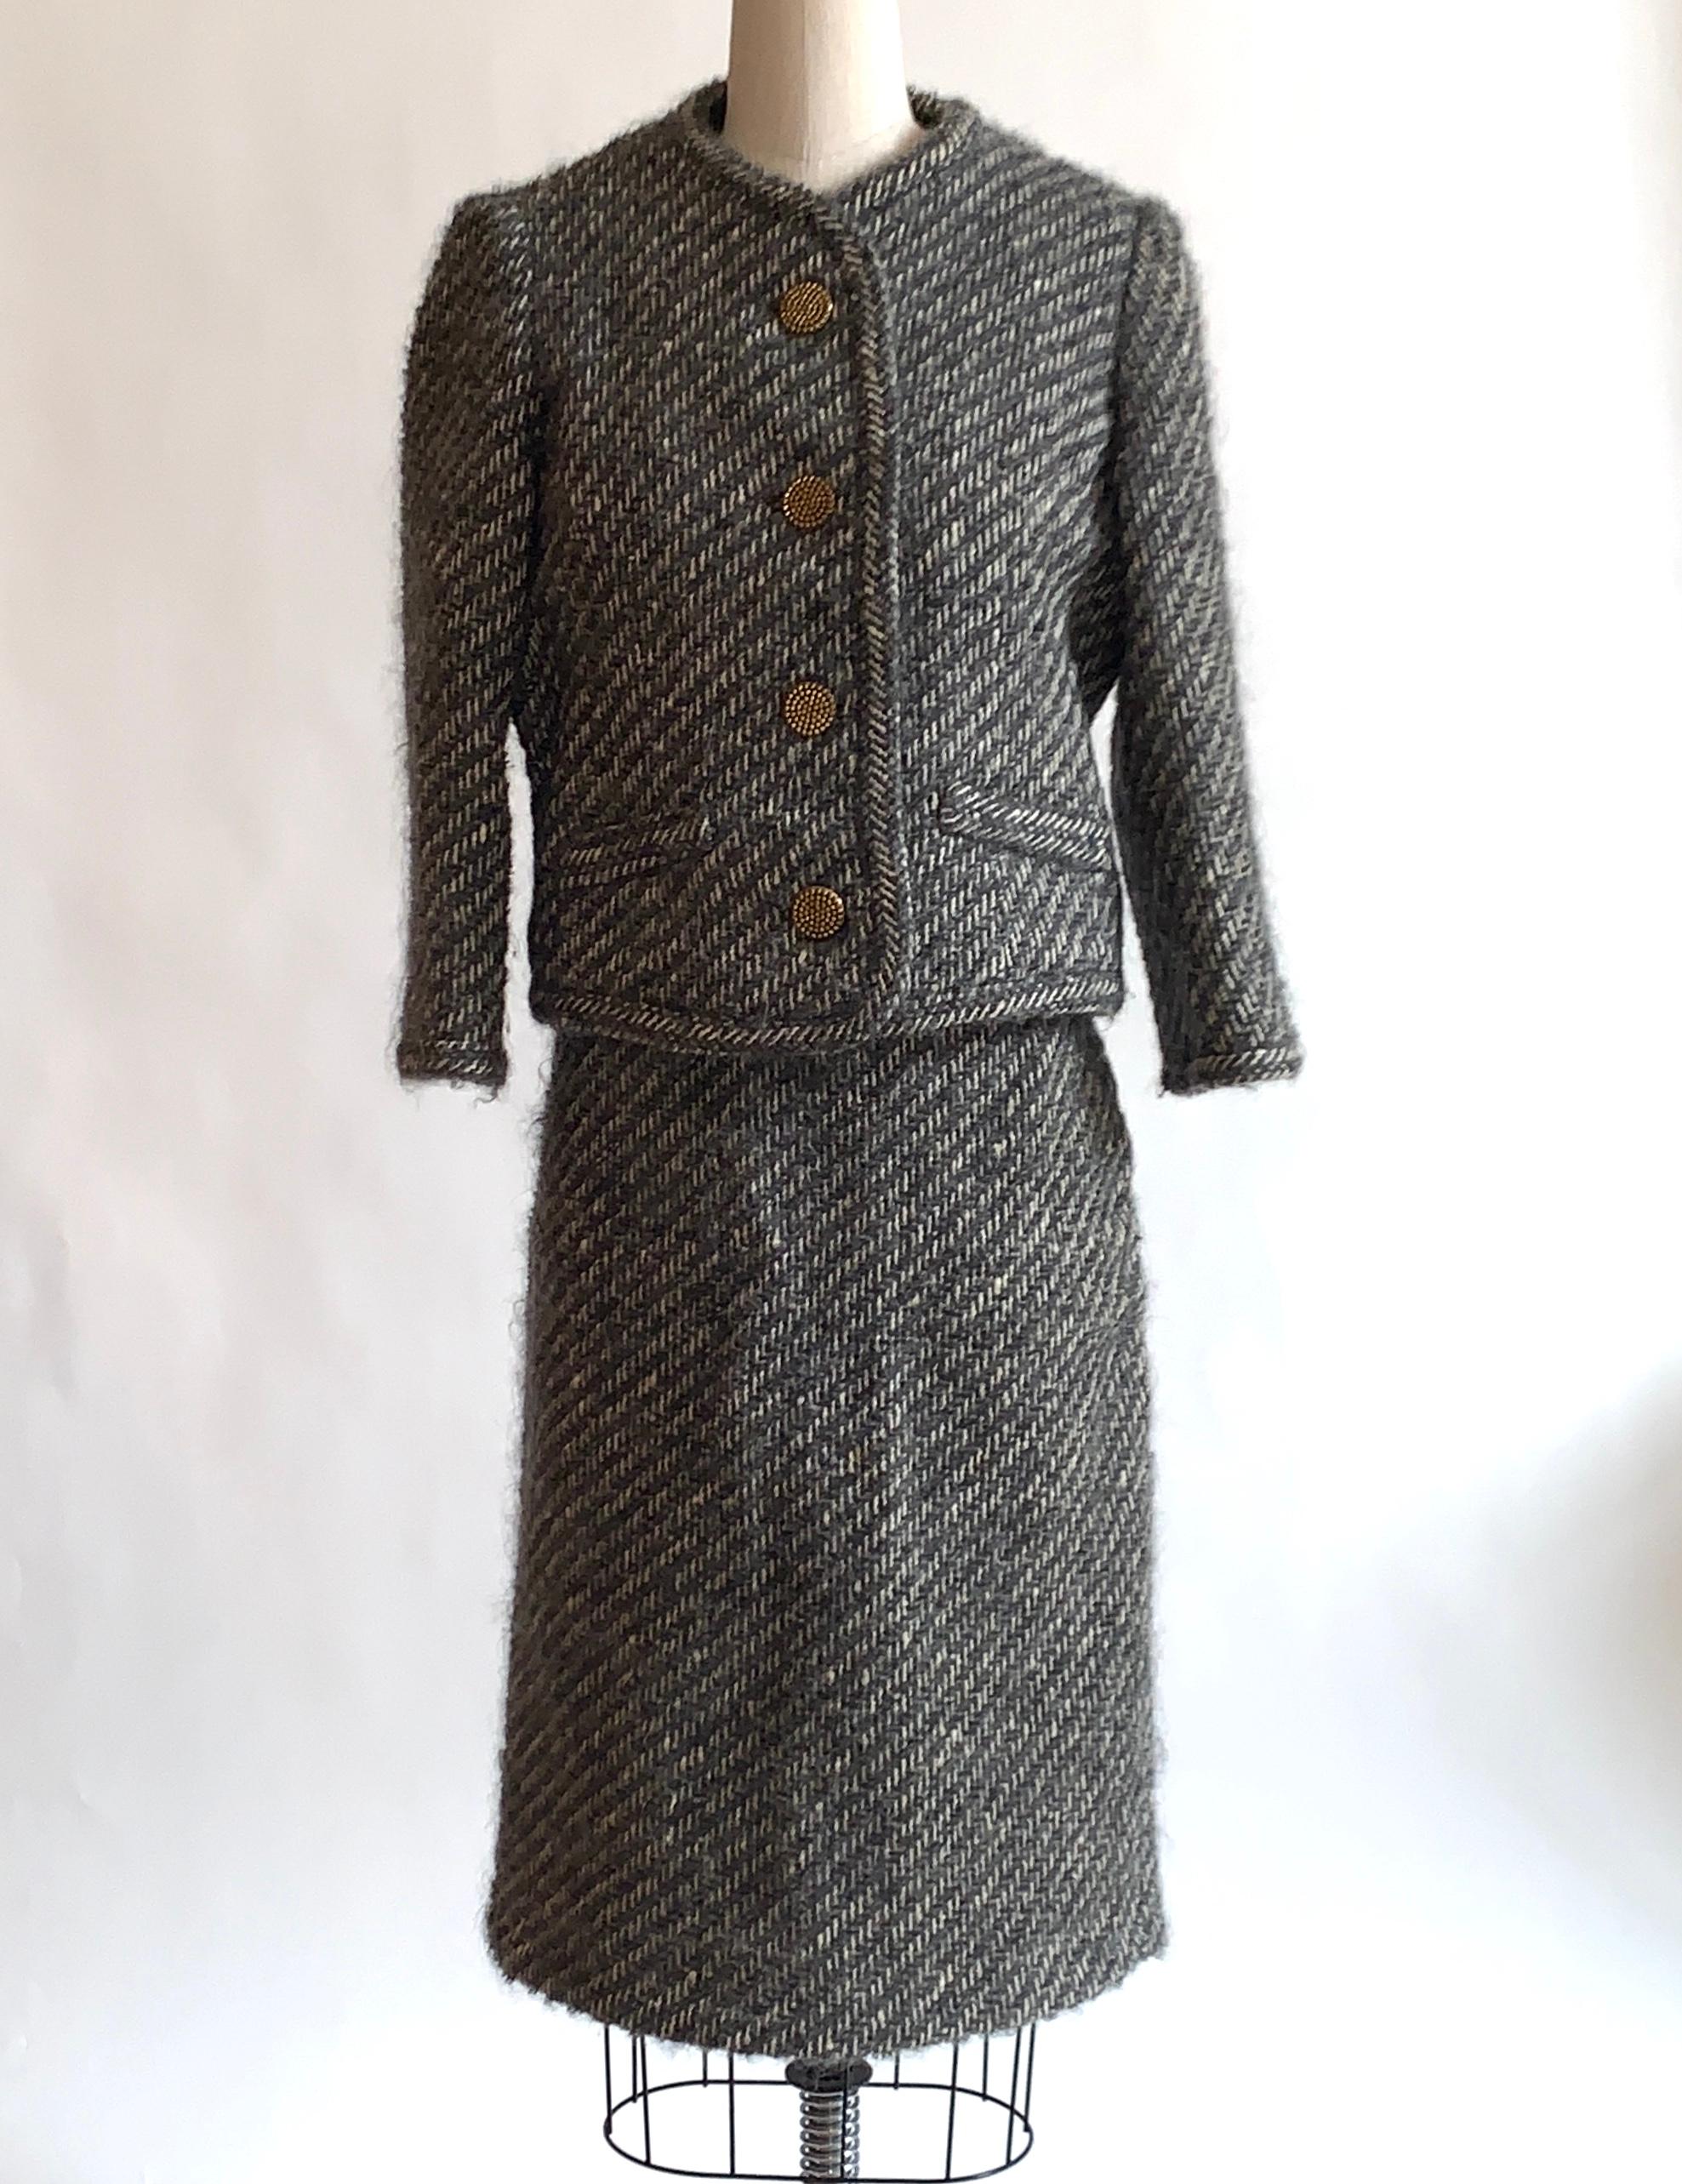 Vintage 1960s Sophie of Saks skirt suit in a super textured grey and white weave. Textured brassy colored metal buttons. Side zip and hook and loop closure at side skirt, five buttons at jacket front..

No content label, feels like it might be a